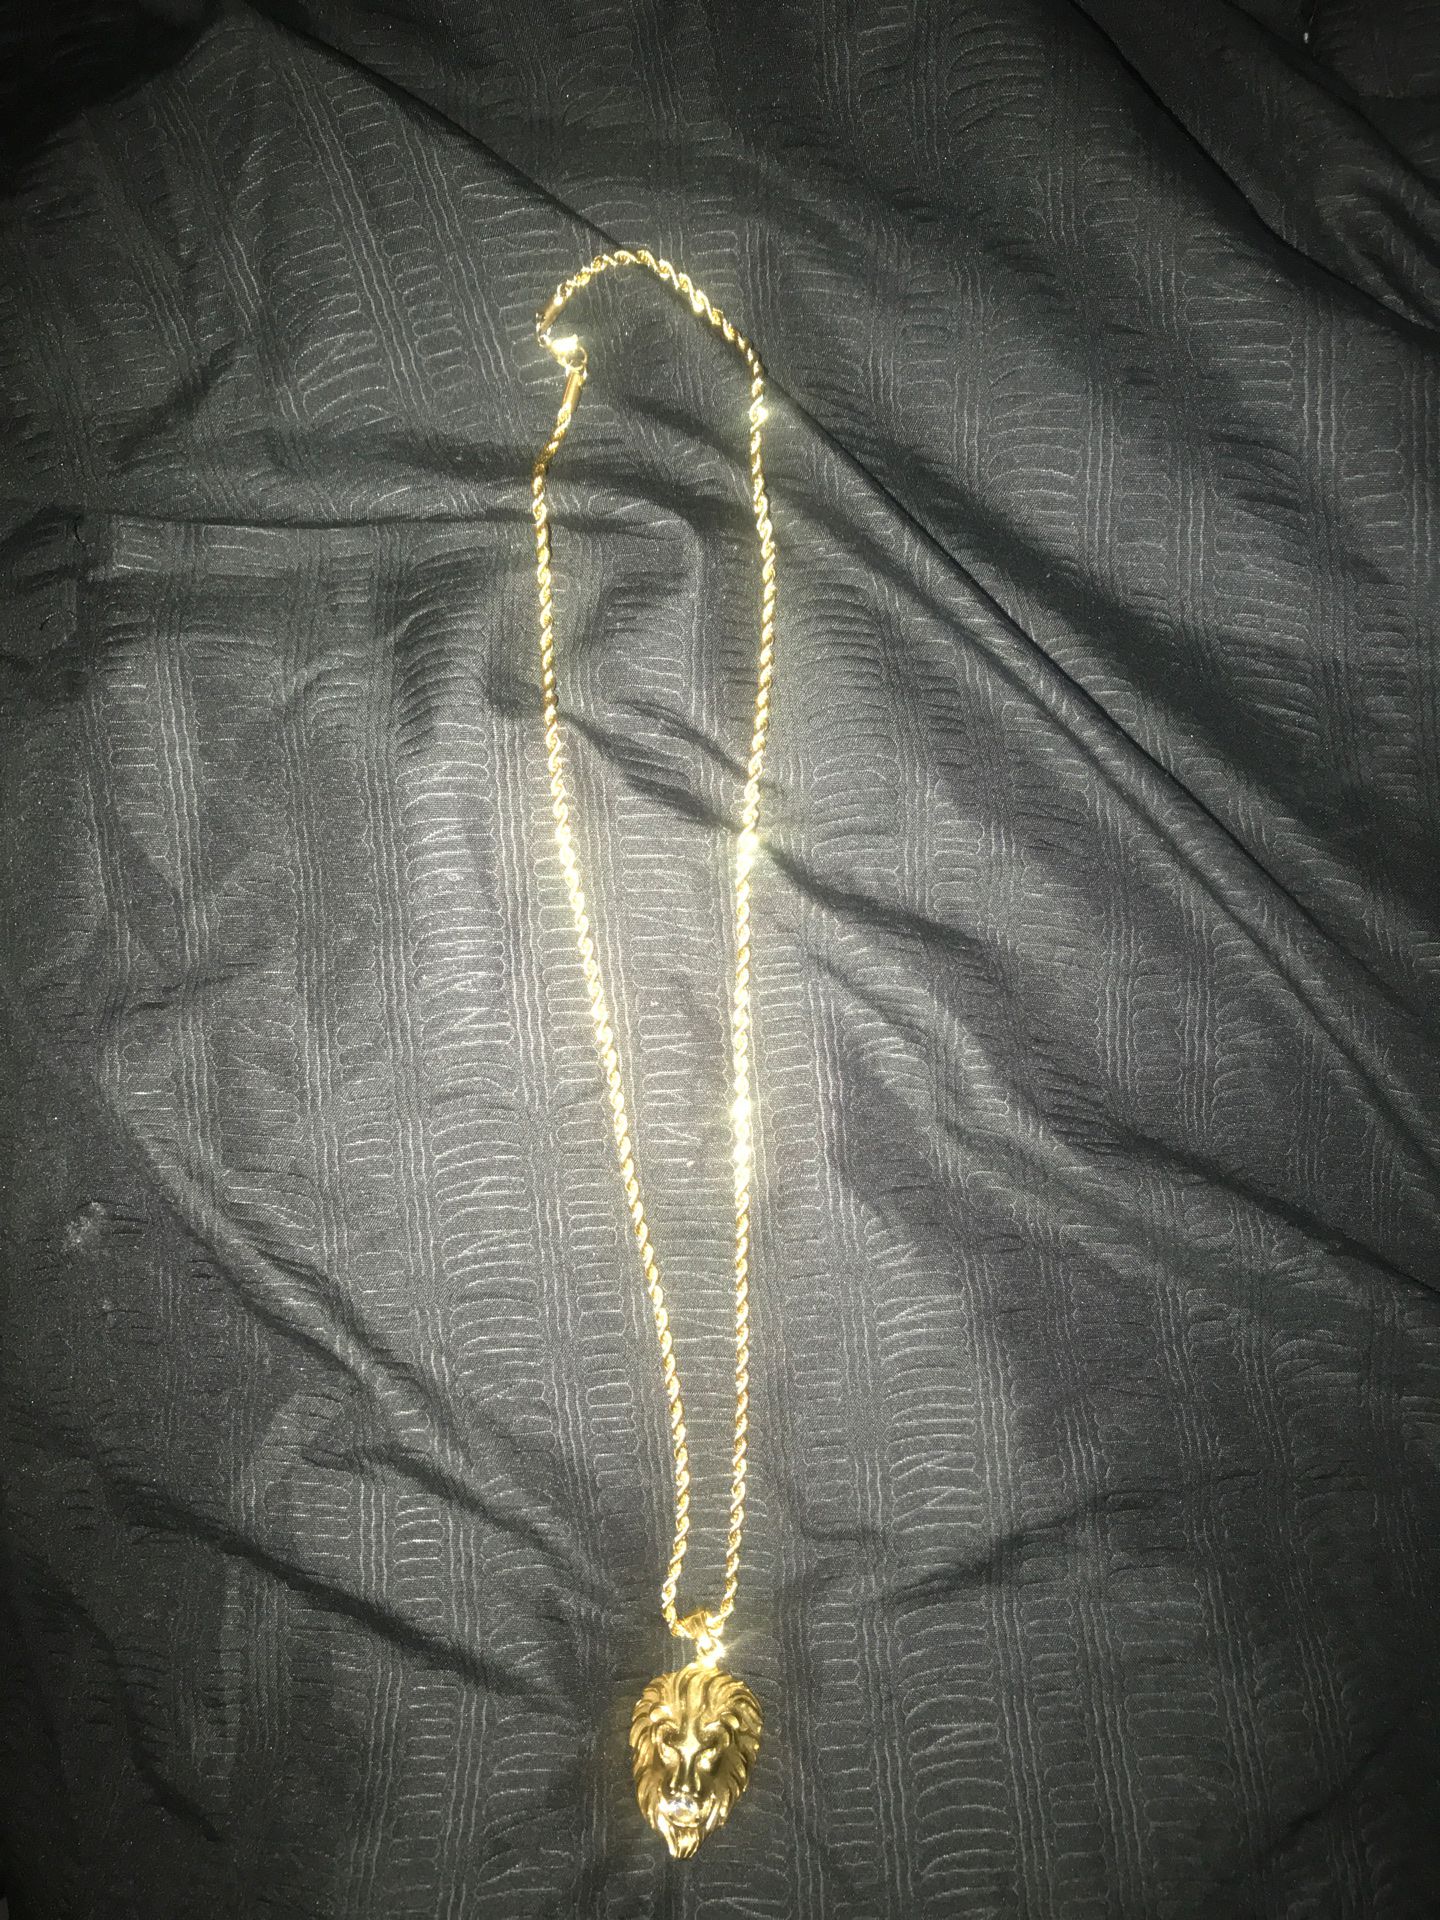 40 gold chain (stainless steel)